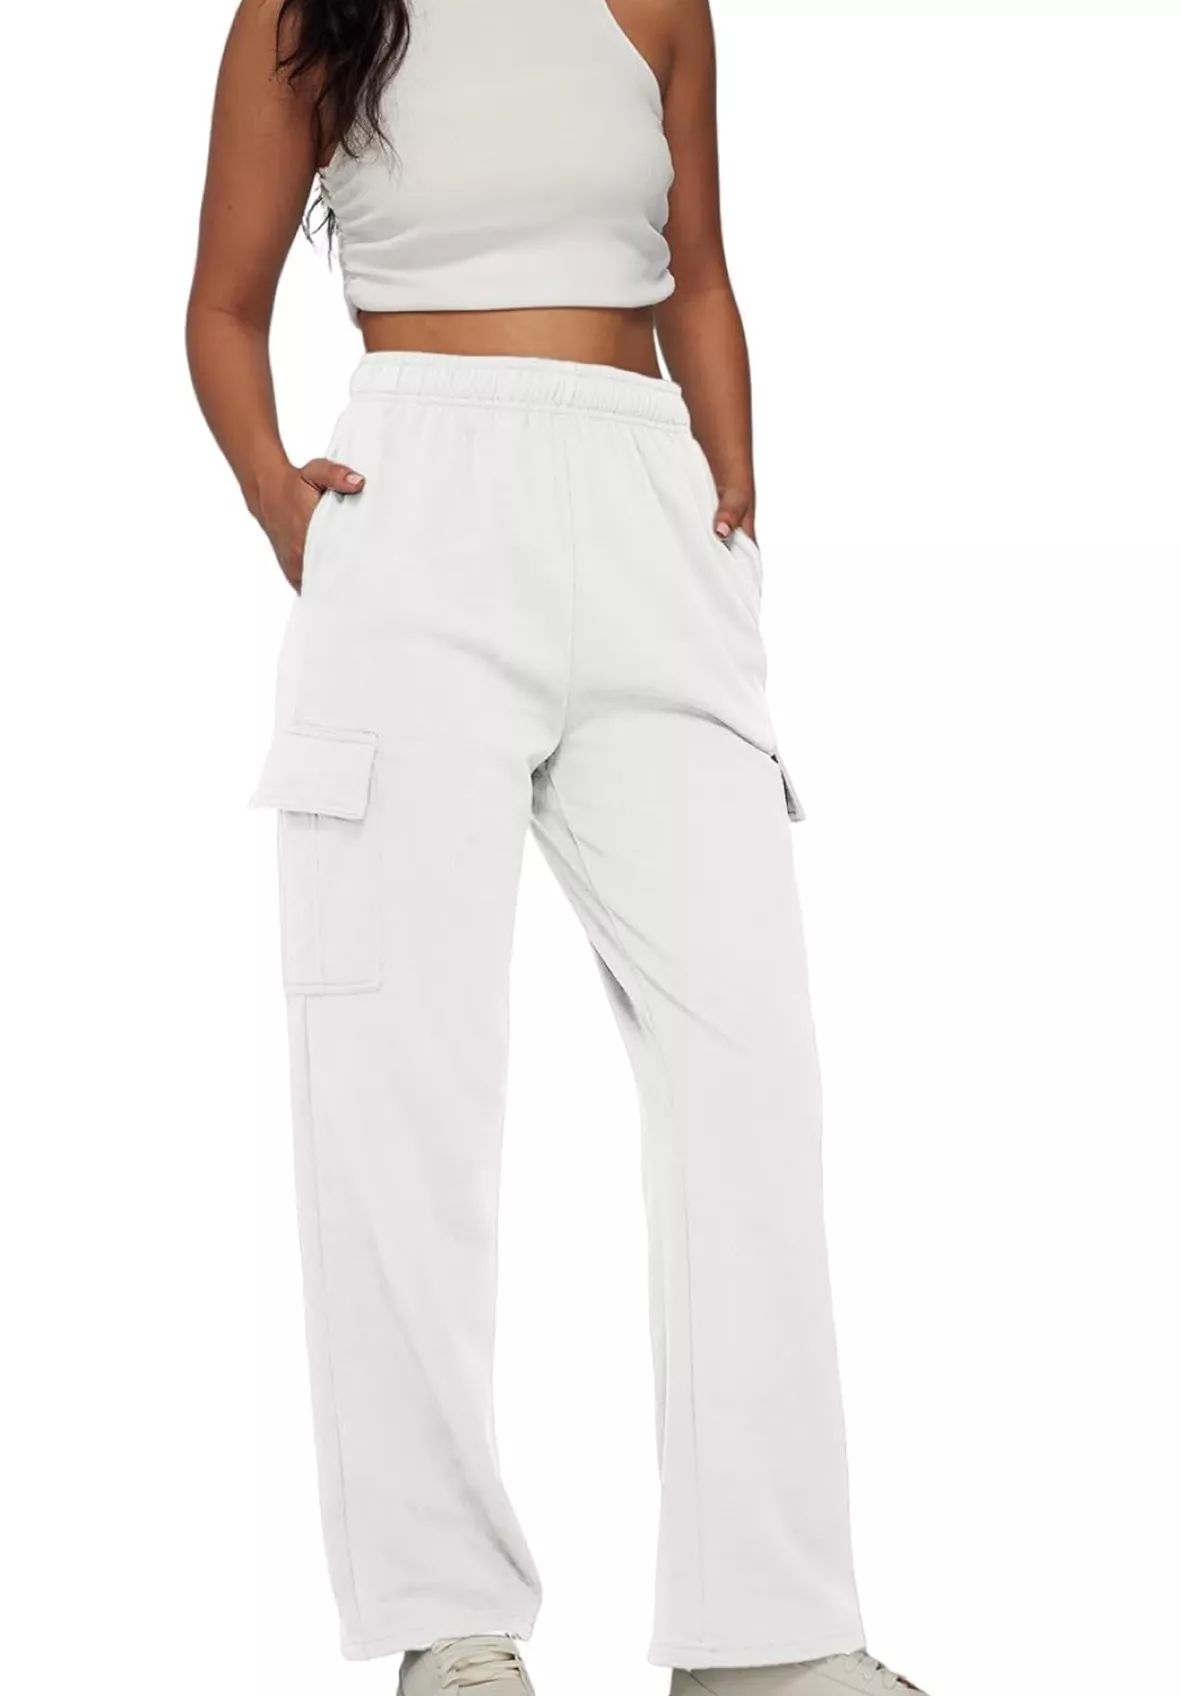  Women's Casual Baggy Sweatpants High Waisted Joggers